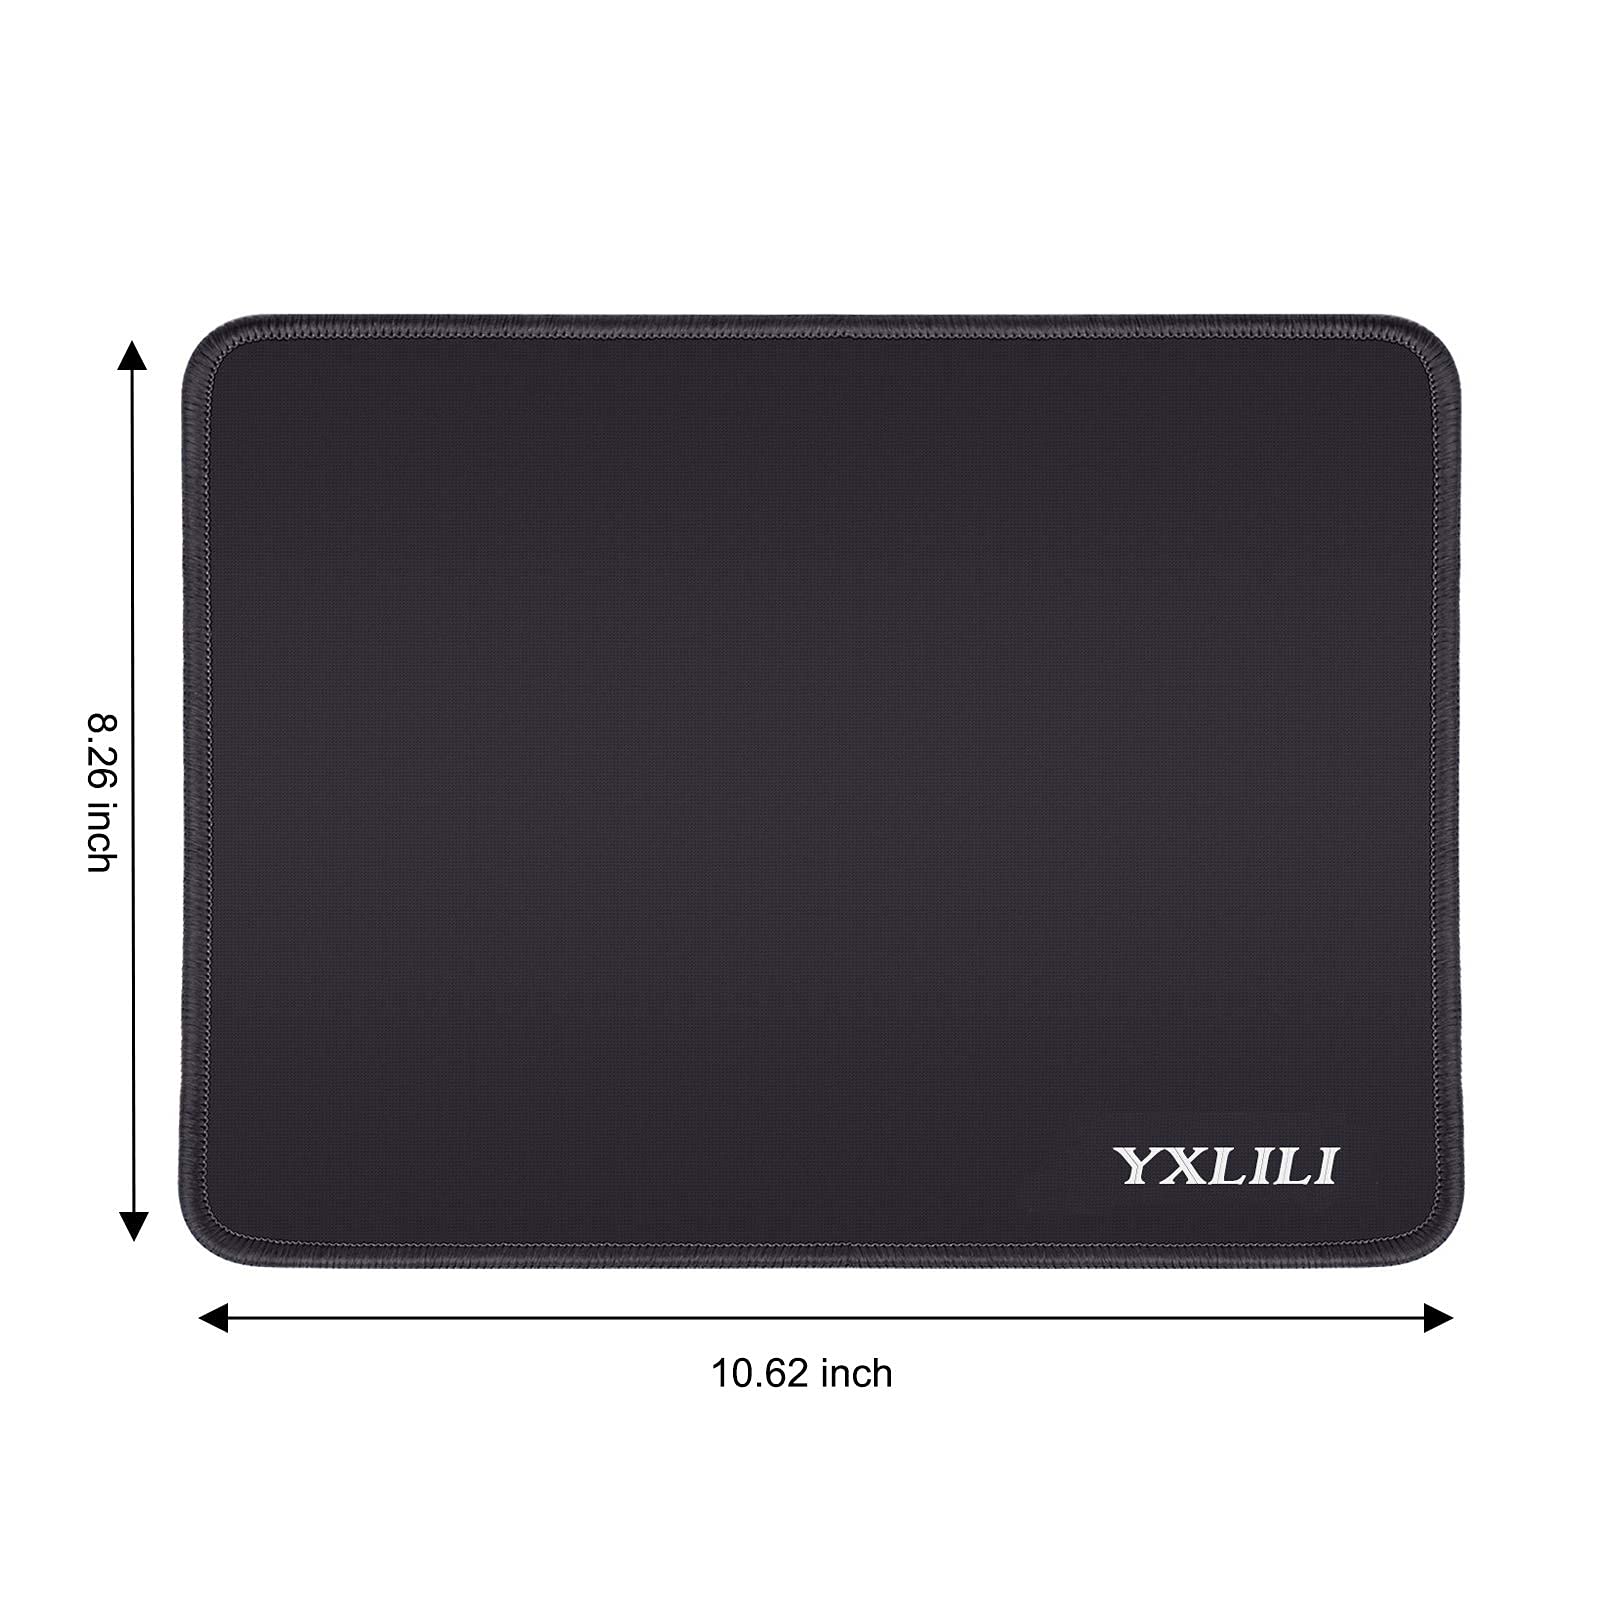 YXLILI Mouse Pad 10.6x8.3x0.12 Inch Gaming Mouse Pads Mouse Mat for Wireless Computer Mouse with Stitched Edges, Non-Slip Rubber Base, Water Resistant Mousepads for Office Home Gaming-Black